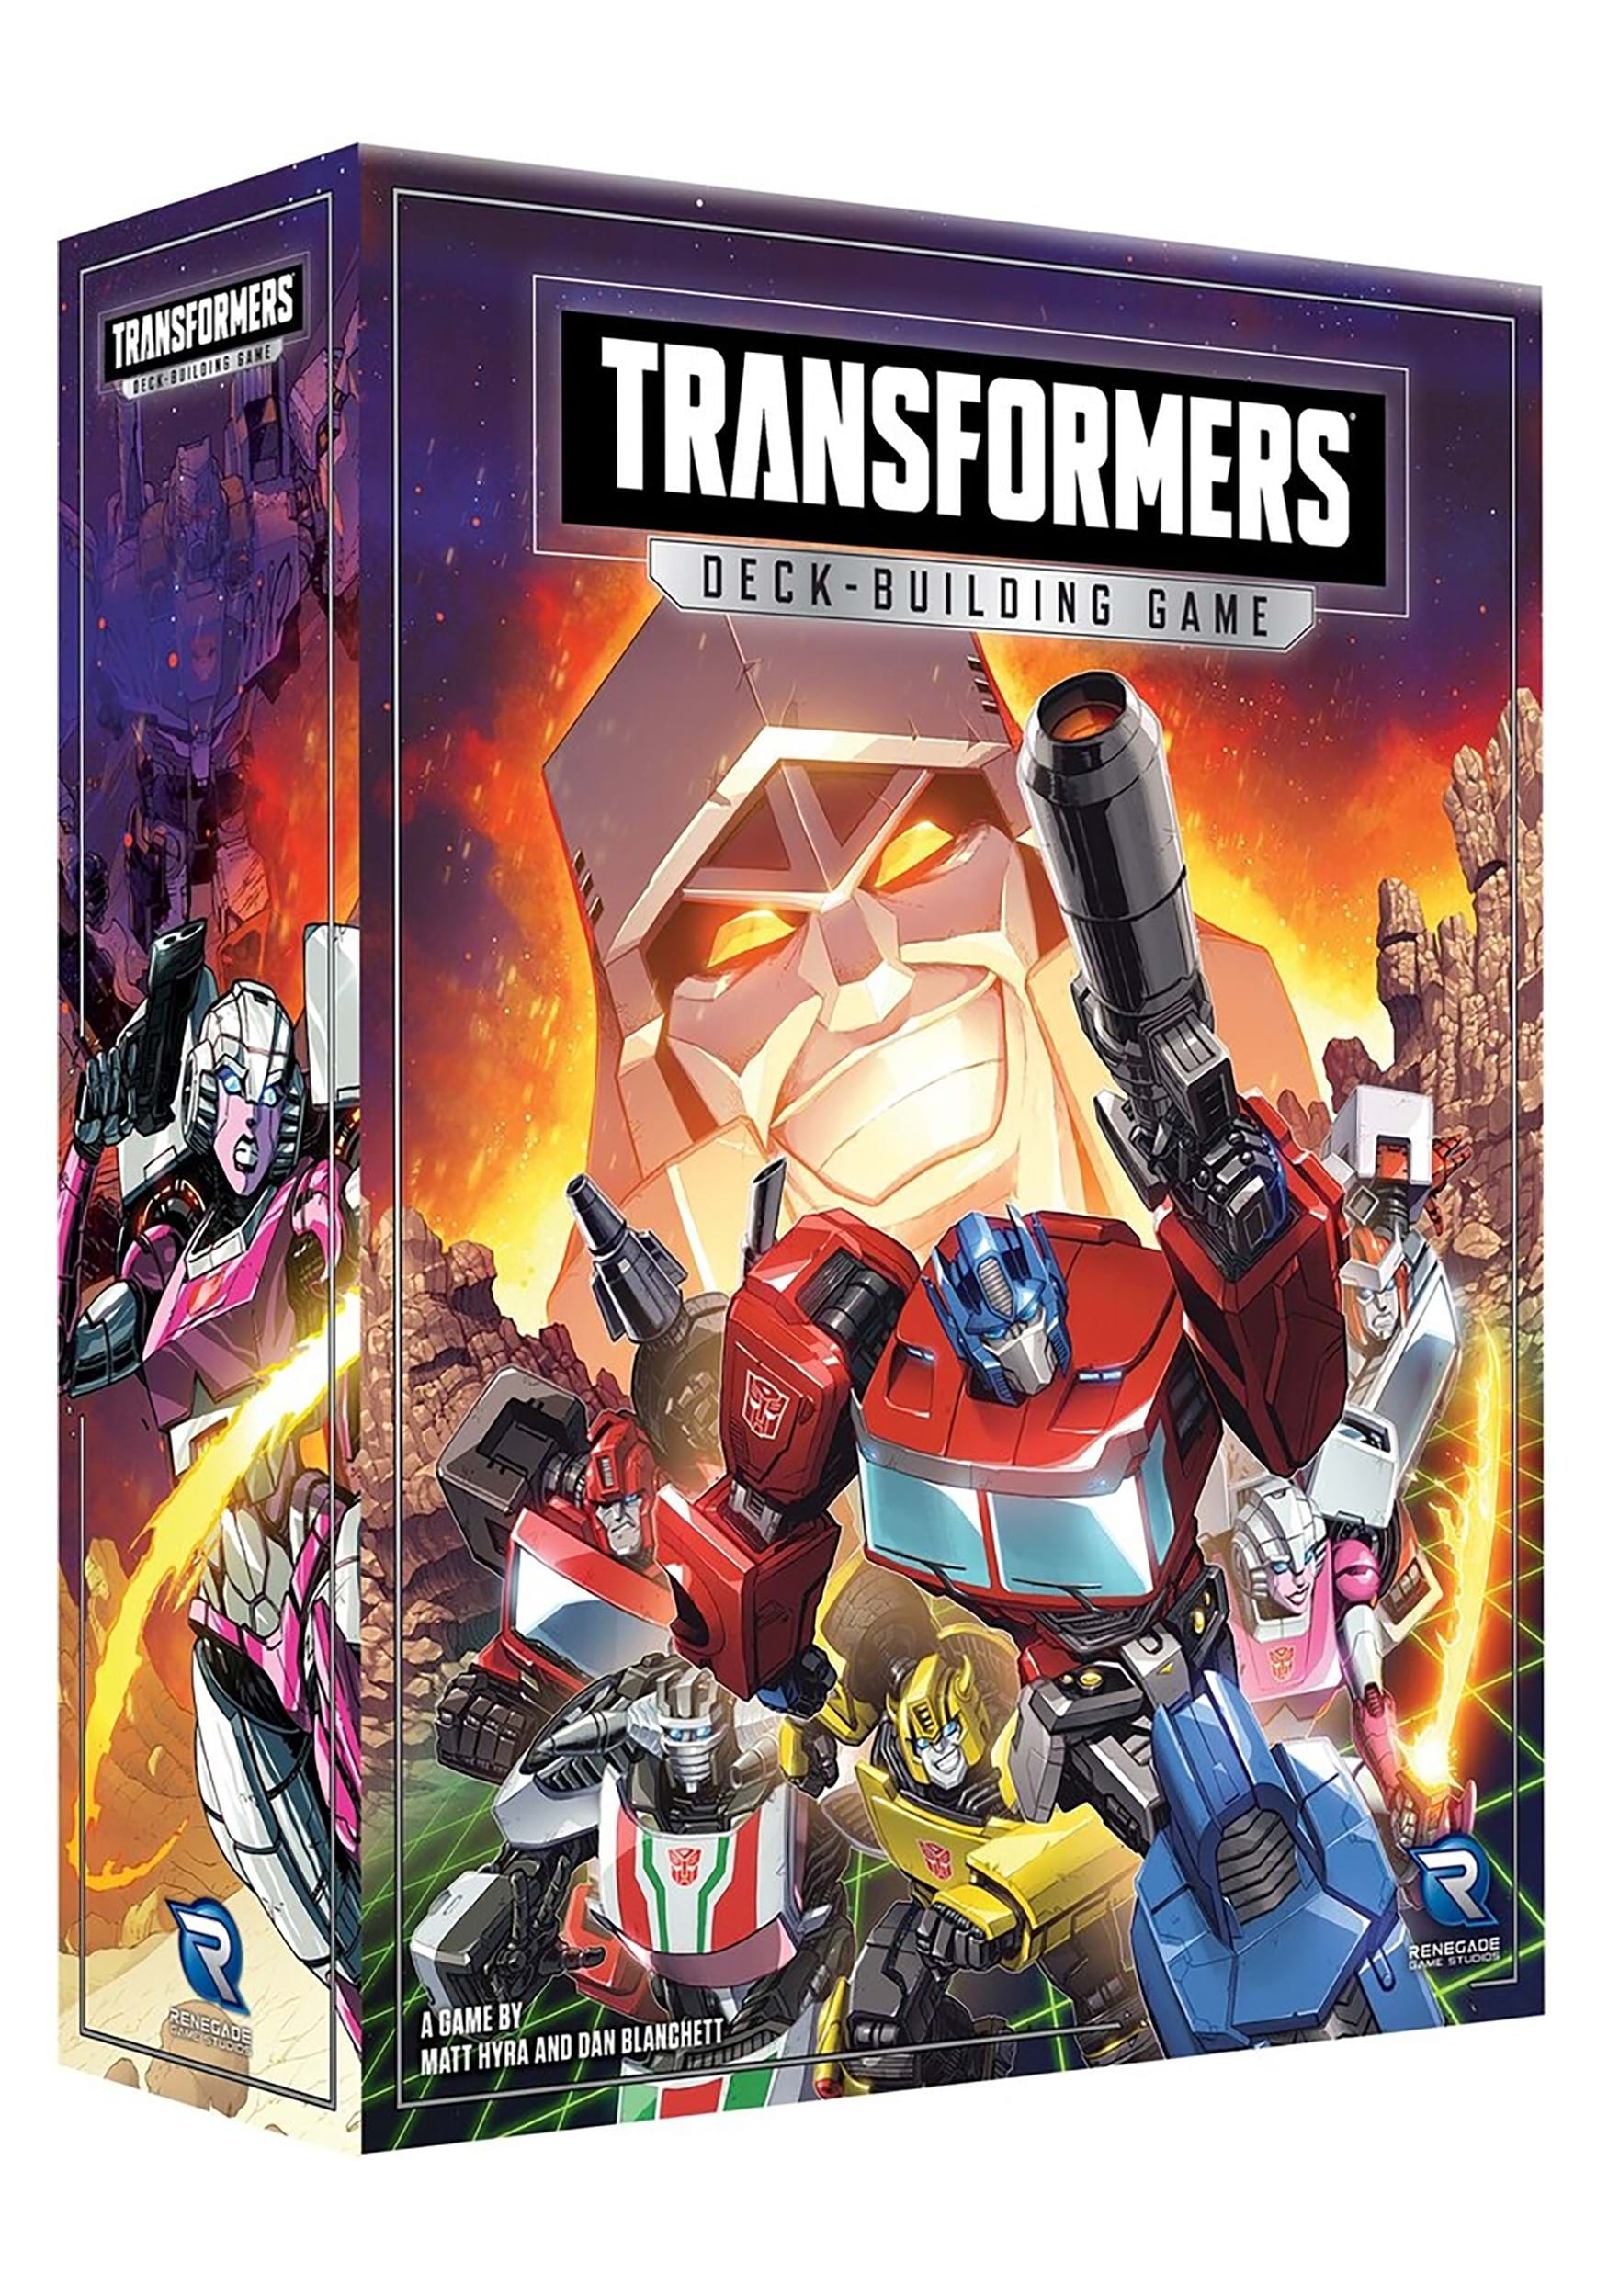 Deck-Building Transformers Game